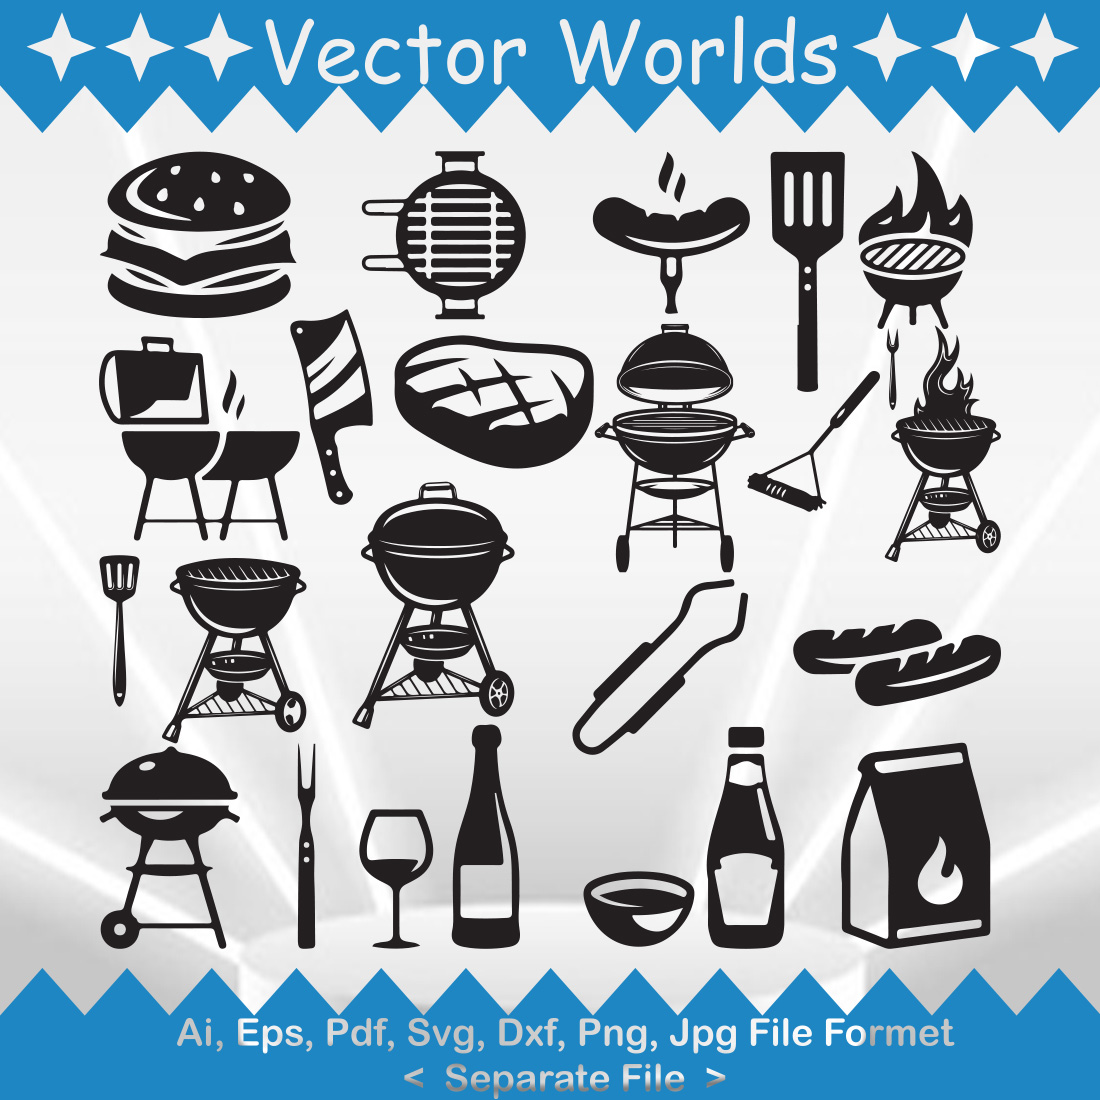 Bundle of vector enchanting images of silhouettes of picnics.